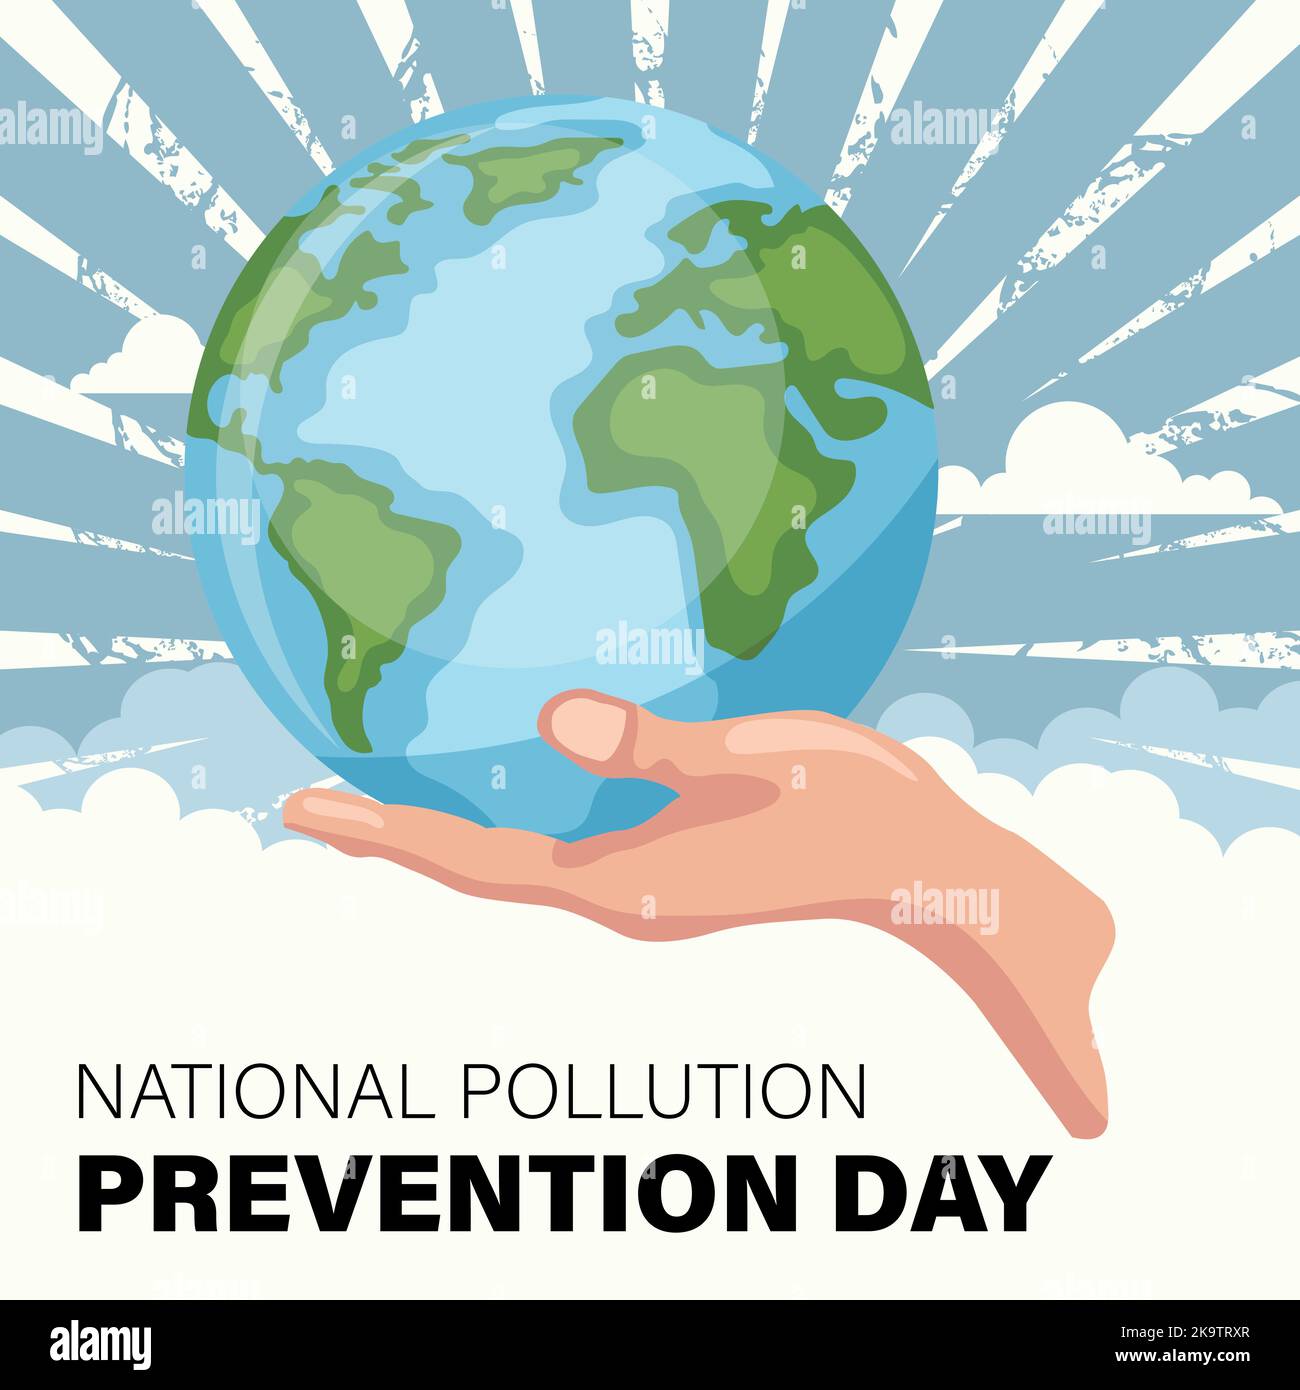 National pollution prevention day design with hand holding planet earth. Poster to raise awareness about caring for the environment Stock Vector